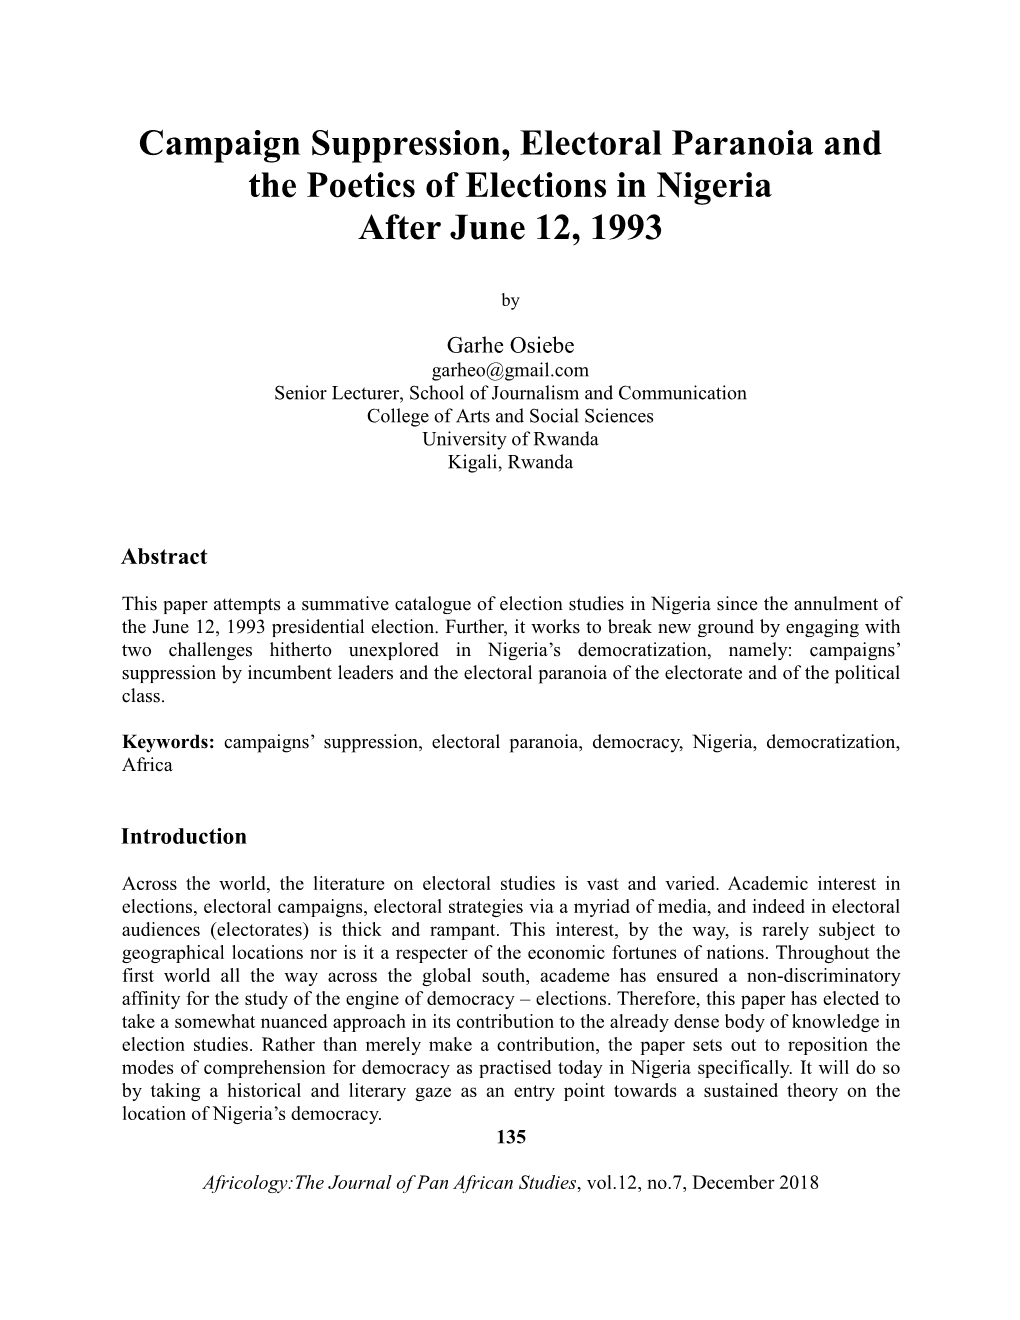 Campaign Suppression, Electoral Paranoia and the Poetics of Elections in Nigeria After June 12, 1993